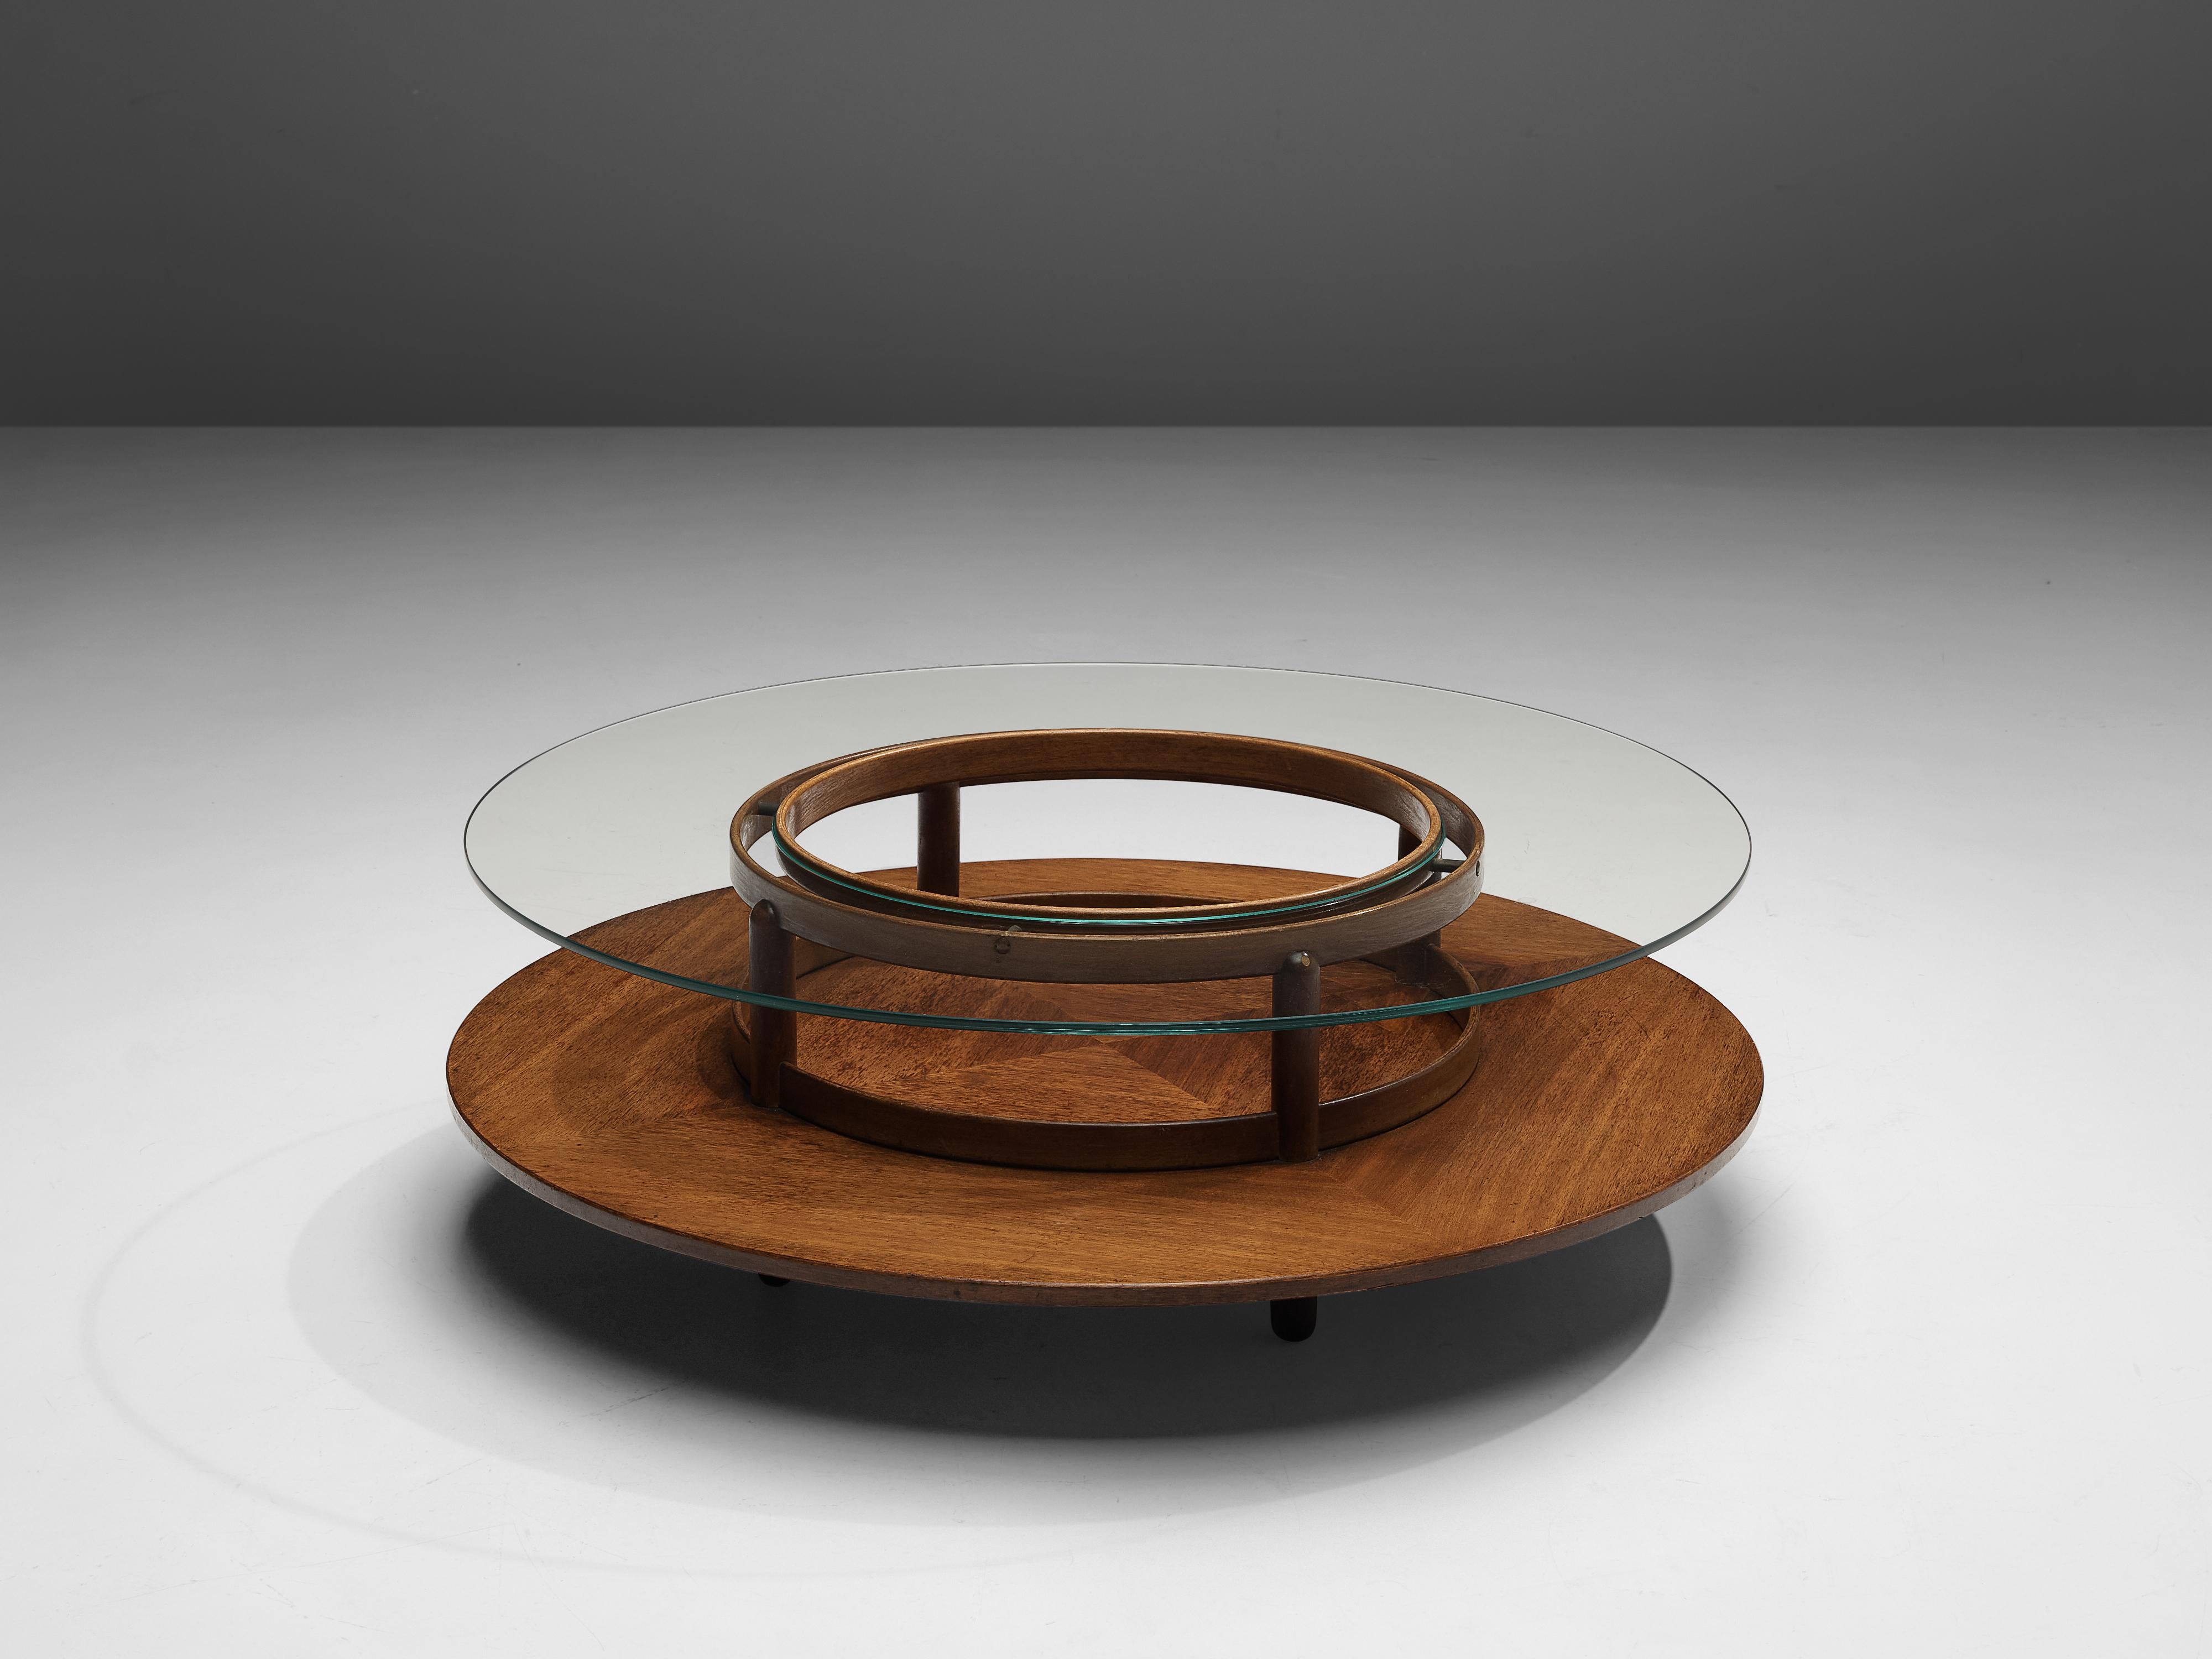 Gianfranco Frattini for Figli di Amedeo Cassina, coffee table, model '774', walnut, glass, Italy, 1960

Designed by Gianfranco Frattini for a sophisticated residential project in Milan, this design was later put into production by Cassina. Its